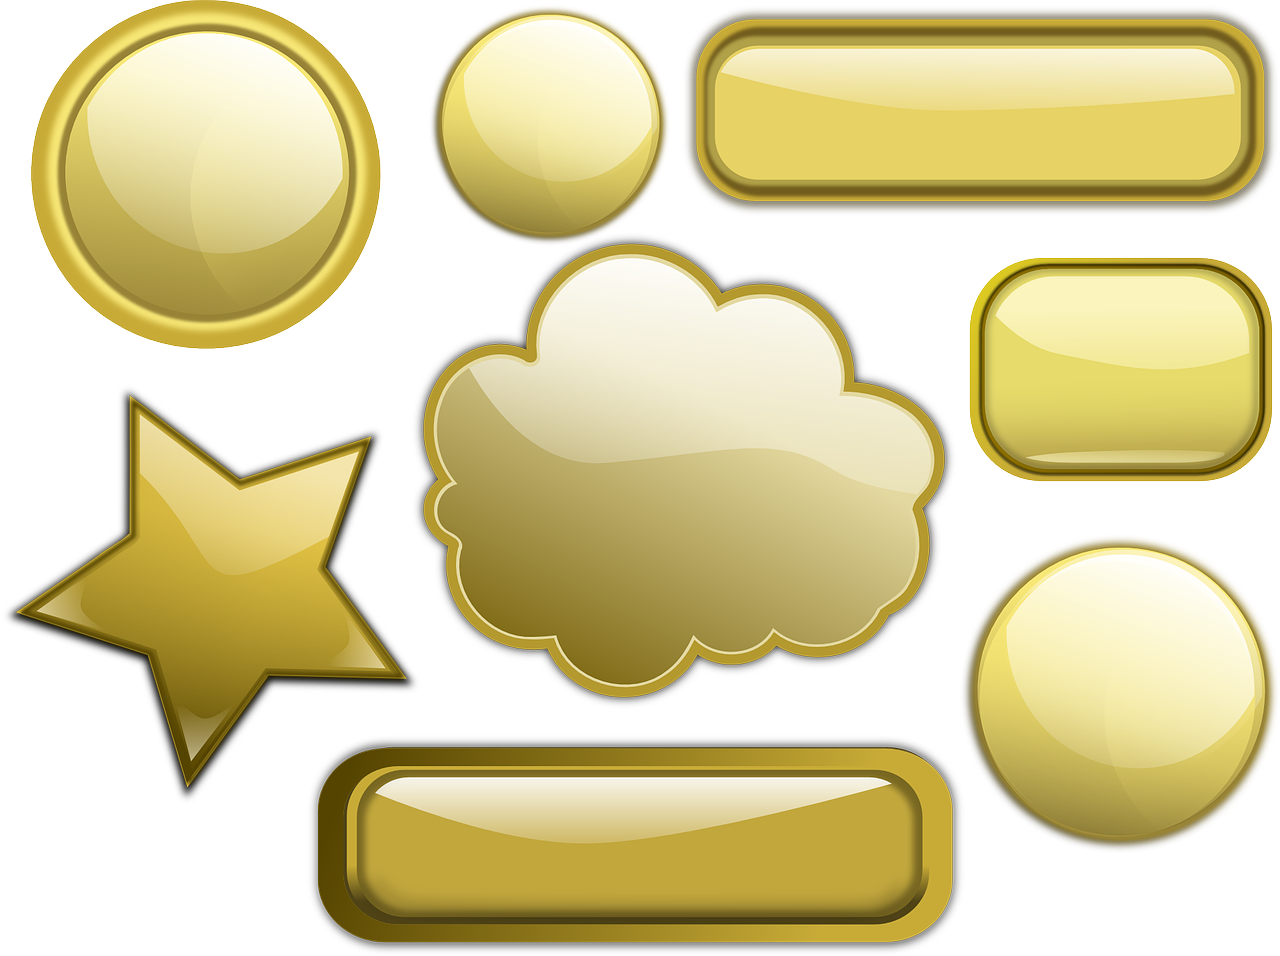 buttons gold glossy free photo